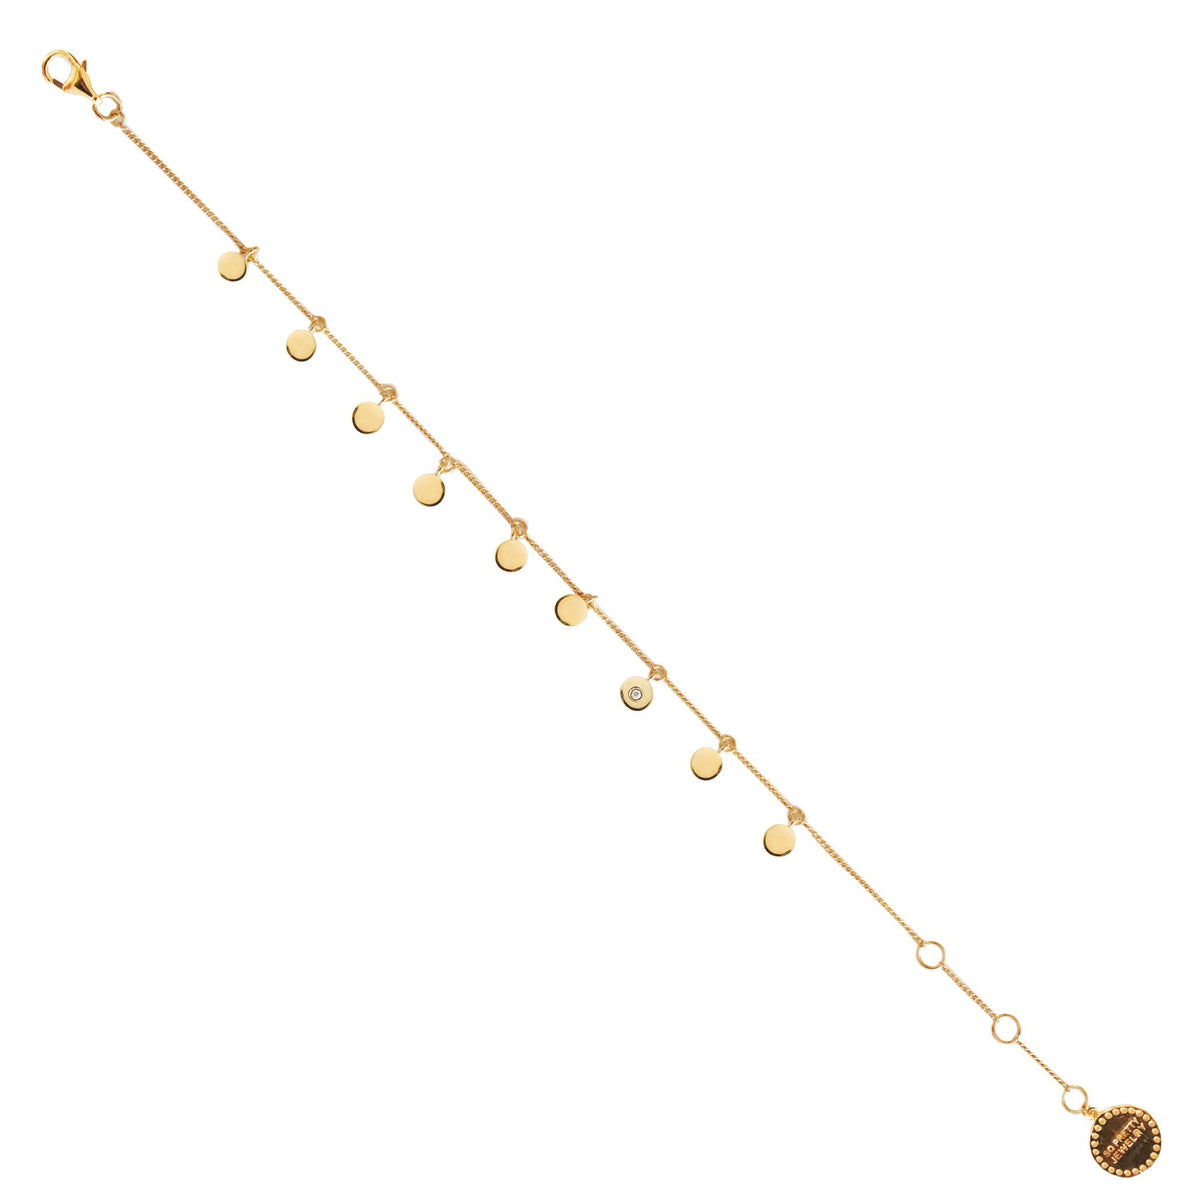 DAY 3 - POISE DISK BRACELET - GOLD, ROSE GOLD, OR SILVER - SO PRETTY CARA COTTER